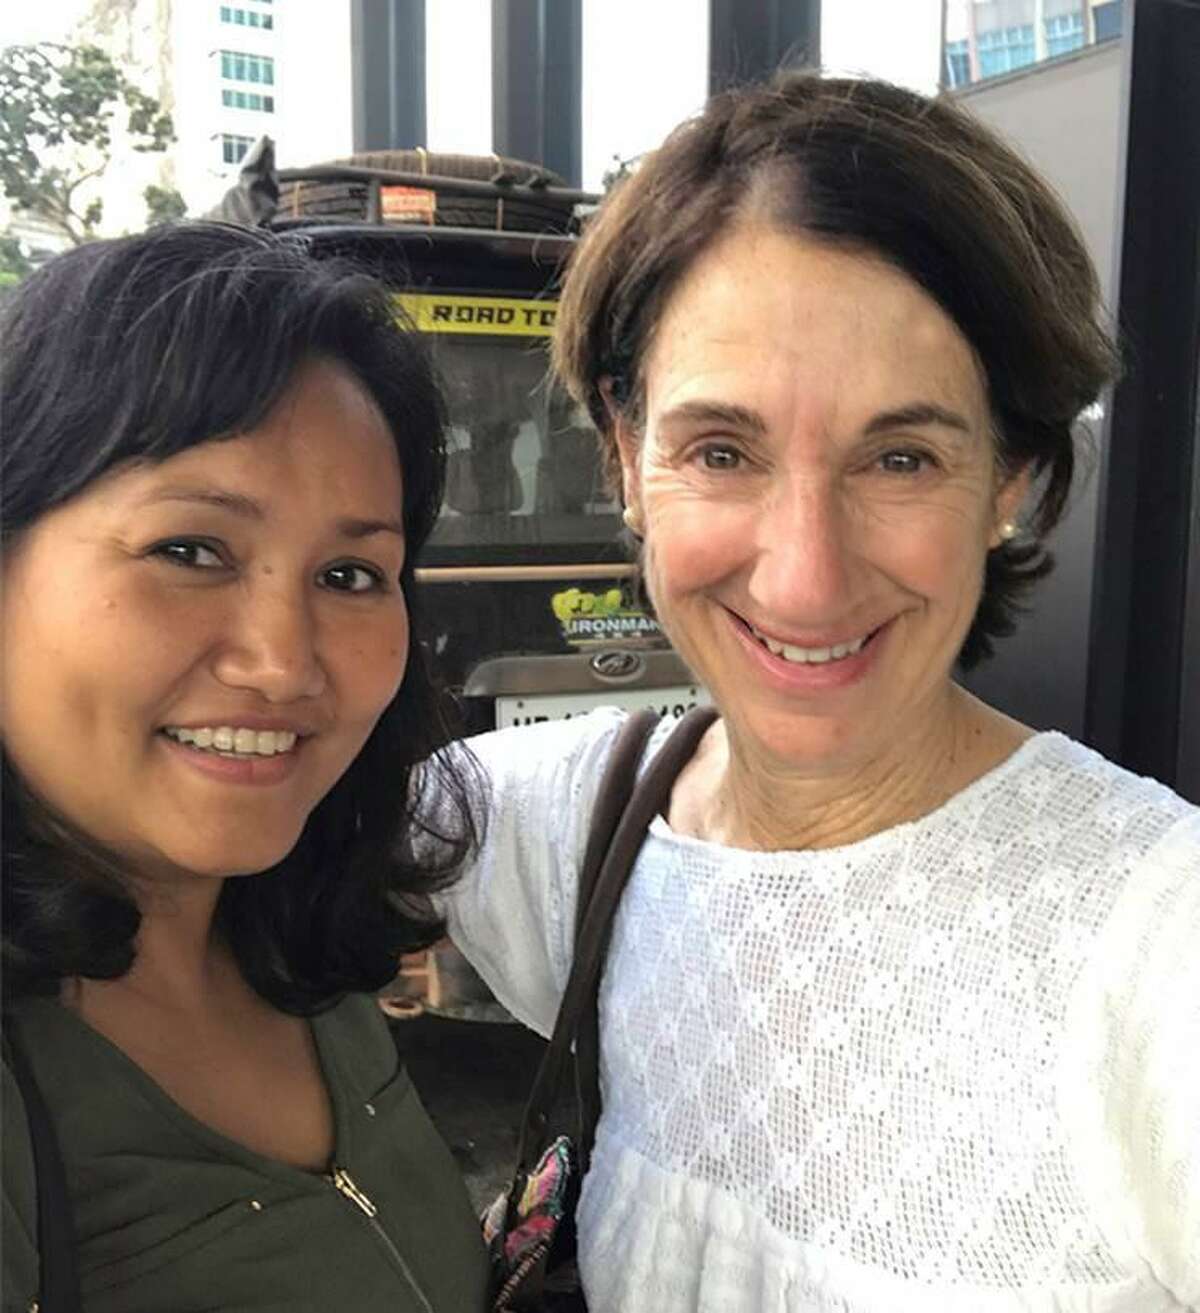 Norwalk resident Emily Kelting met May's mother Soe while on a photography tour through Myanmar in January 2020. The two women kept in touch, and Kelting has been working to help her family get student visas to come study in America.